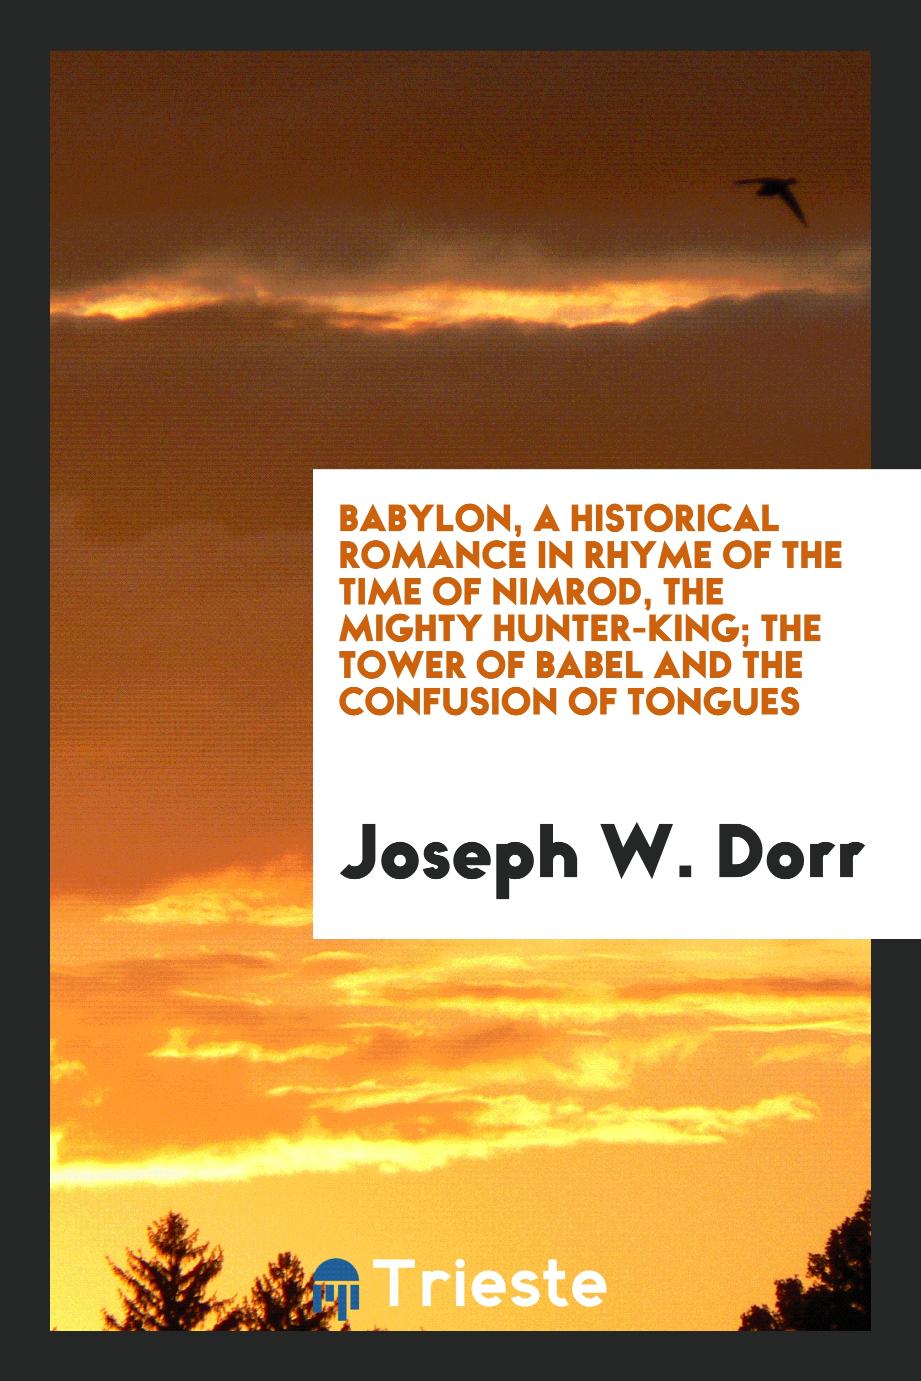 Babylon, a historical romance in rhyme of the time of Nimrod, the mighty hunter-king; The tower of babel and the confusion of tongues